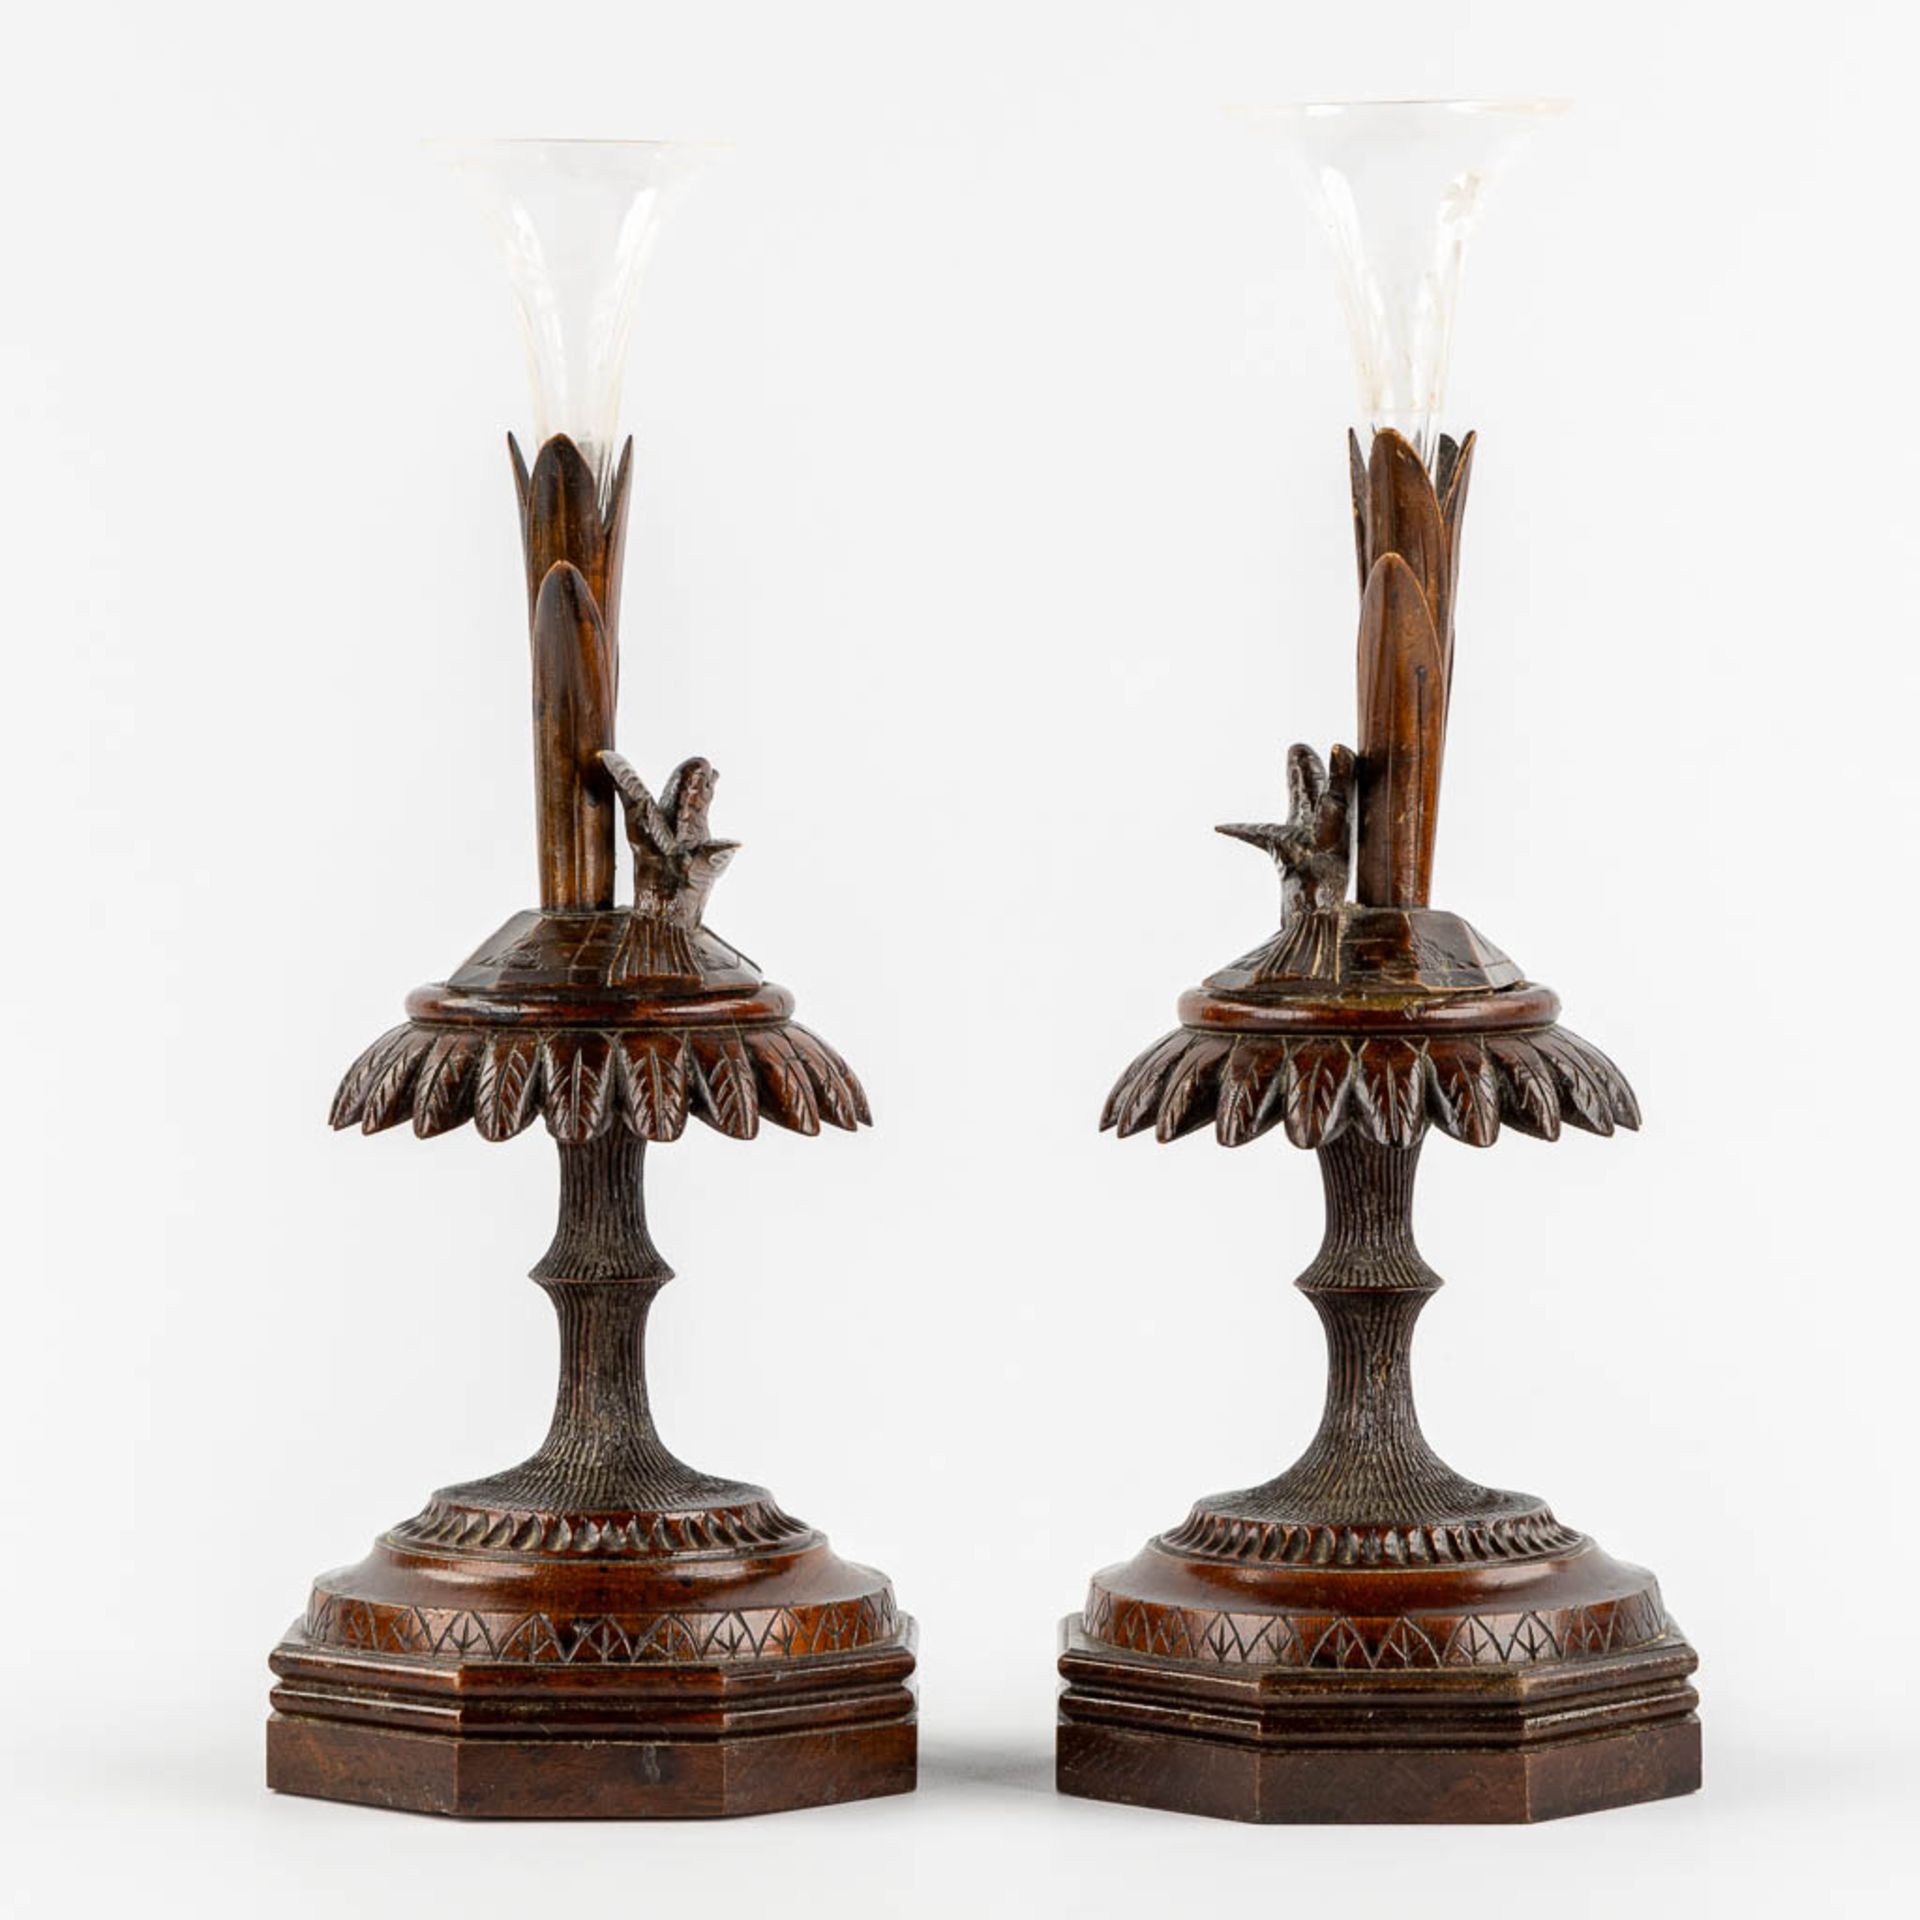 Two bases for Trumpet Vases, Schwartzwald or Black Forest. Circa 1880. (L:14,5 x W:14,5 x H:40 cm) - Image 6 of 11